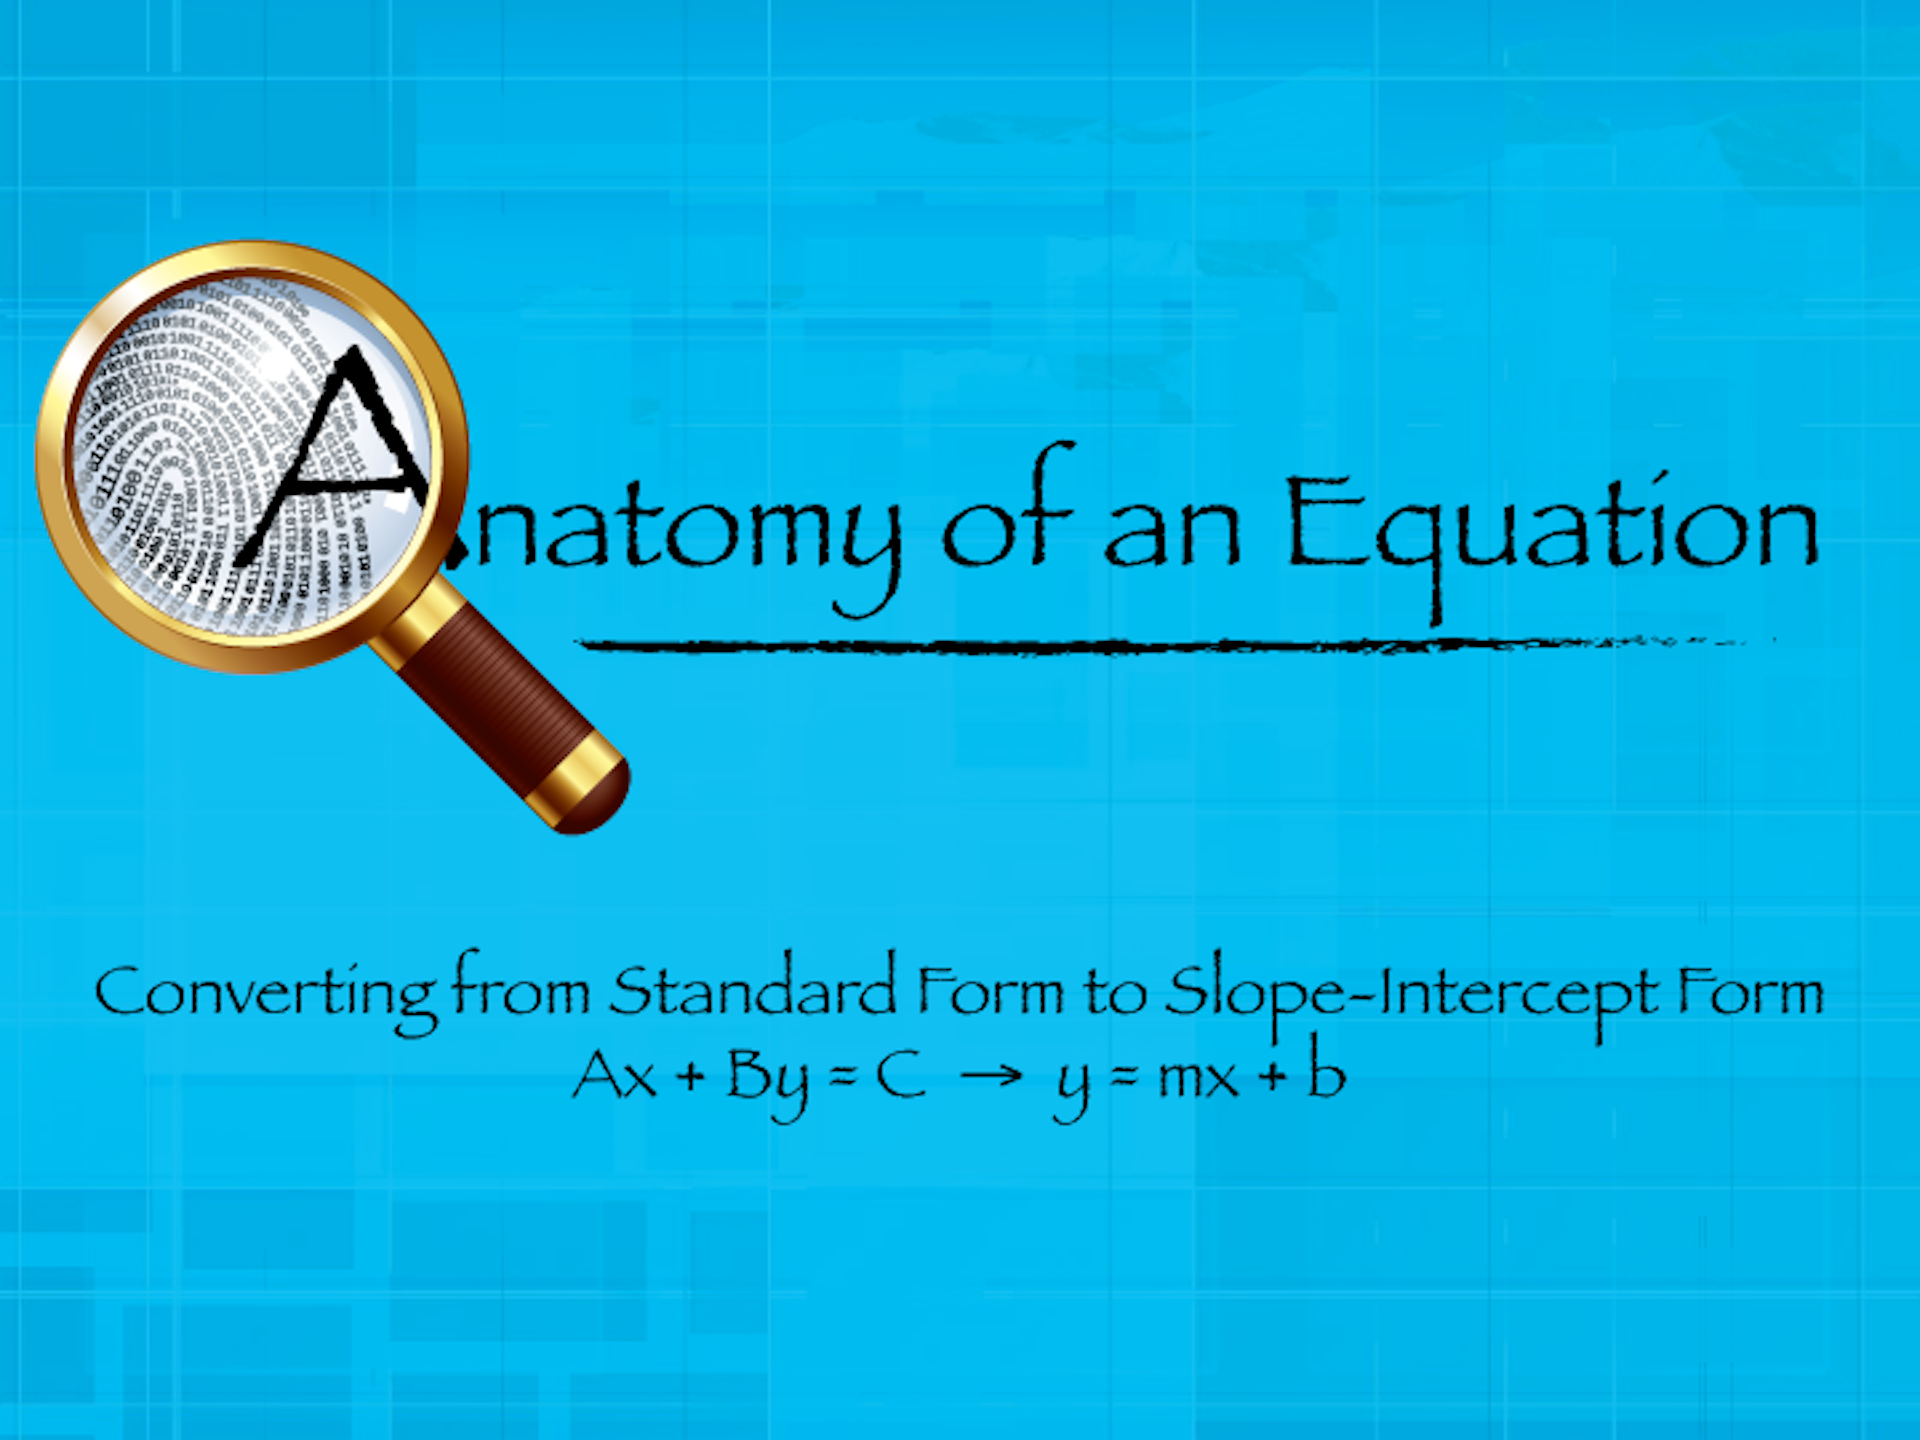 Closed Captioned Video: Anatomy of an Equation: Linear Equations in Standard Form to Slope-Intercept Form 1: Ax + By = C